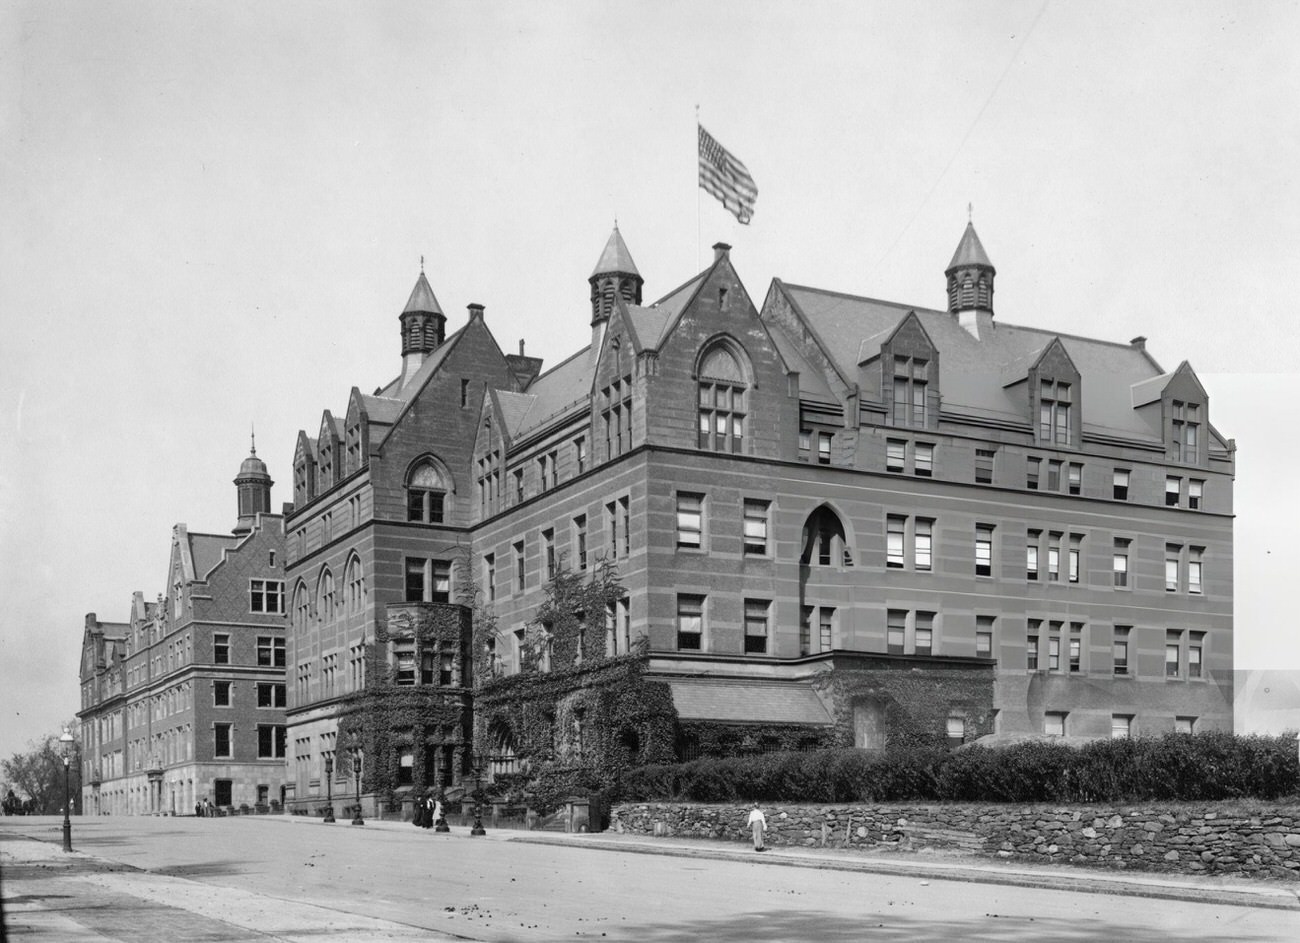 Morris High School On E 166Th Street And Boston Road In The Bronx, 1895.